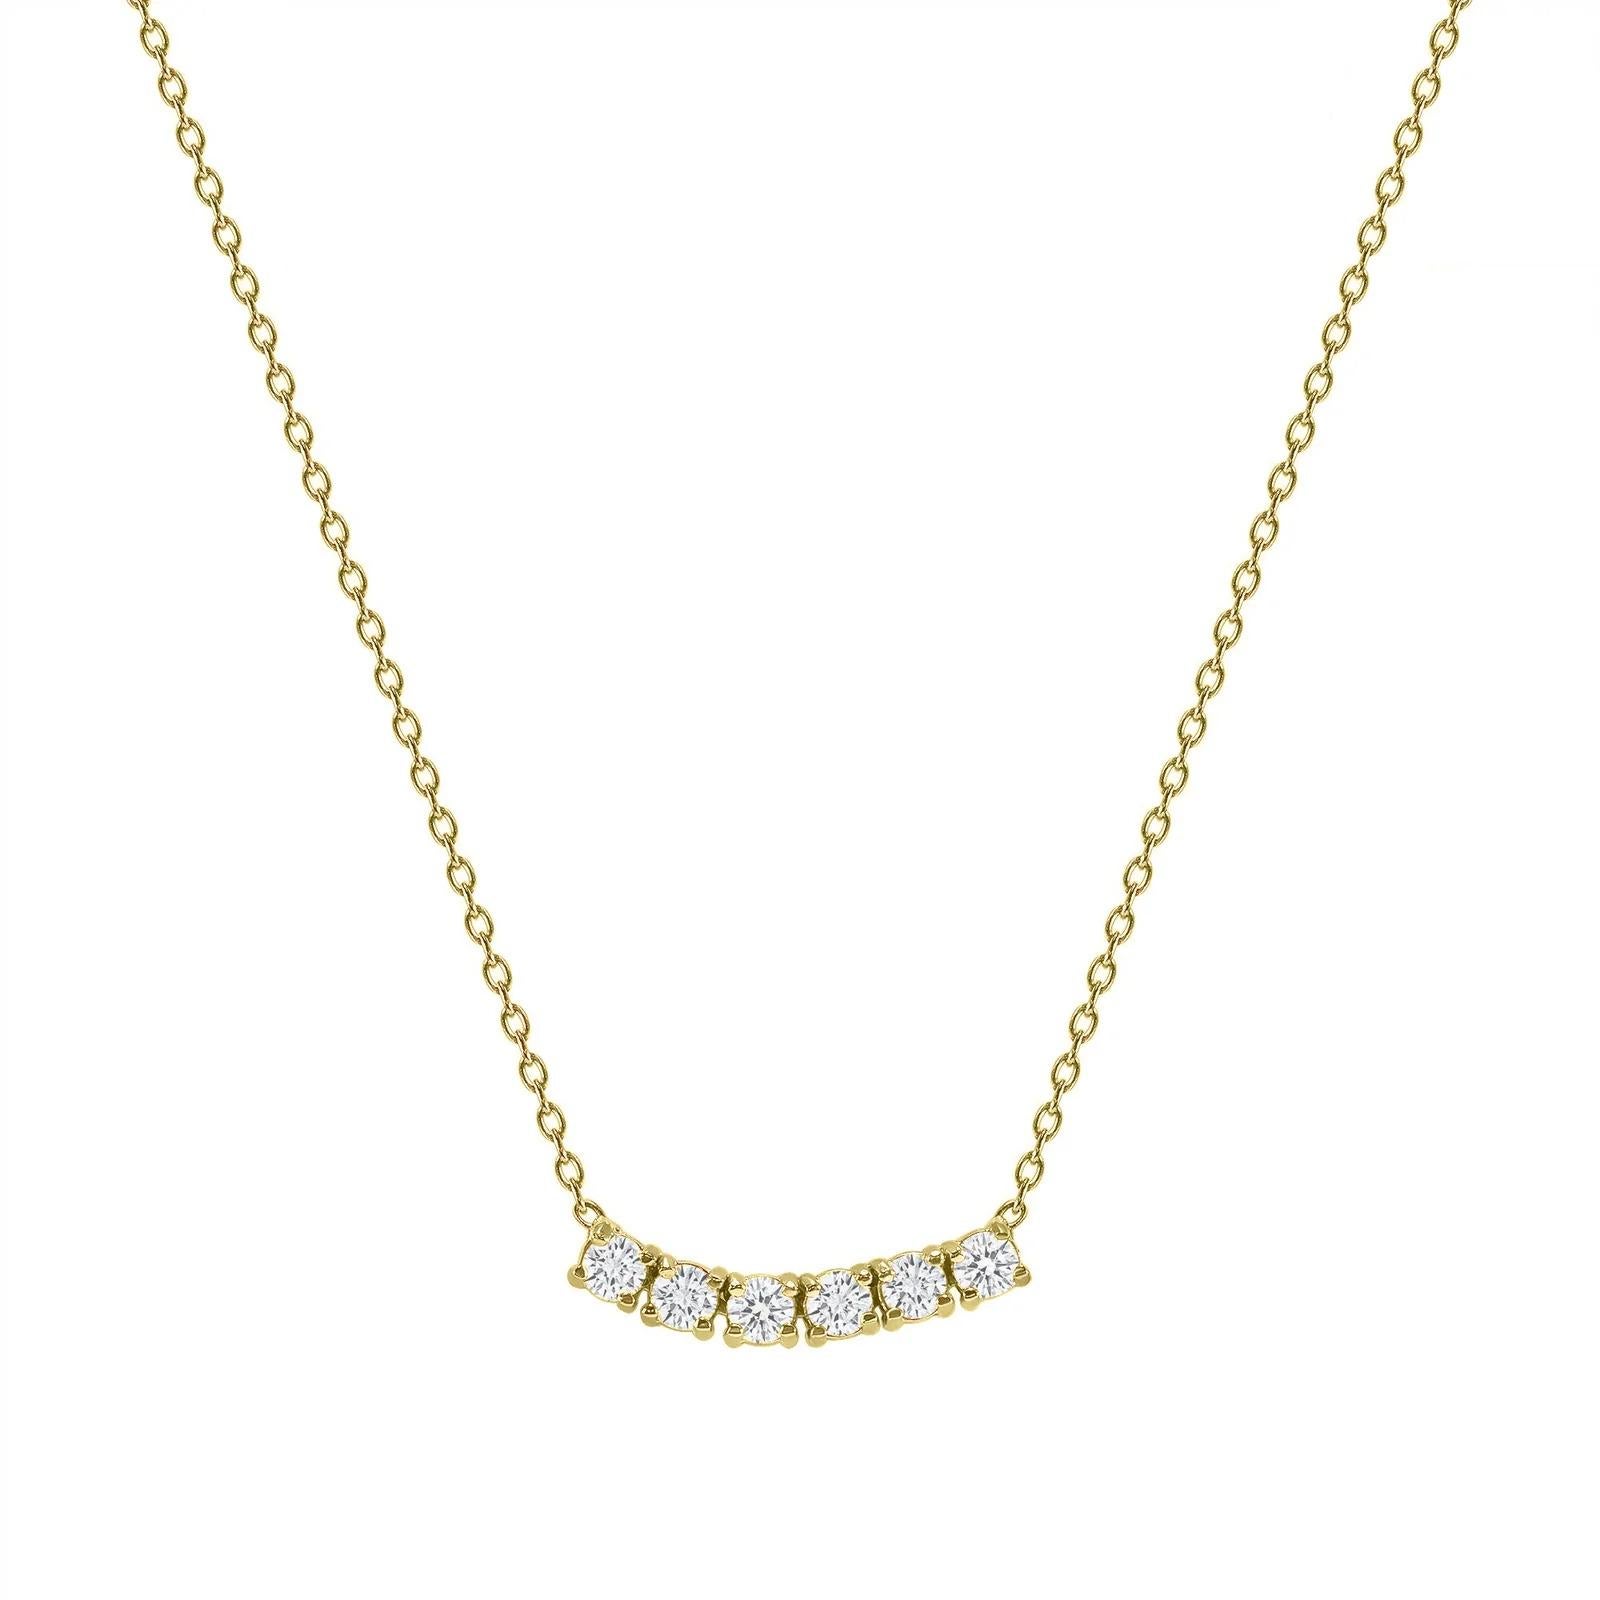 This petite, curved diamond necklace is crafted with gorgeous 14k gold set with six round diamonds.  

Gold: 14k 
Diamond Total Carats: 2 ct
Diamond Cut: Round (6 diamonds)
Diamond Clarity: VS
Diamond Color: F
Color: Yellow Gold
Necklace Length: 16